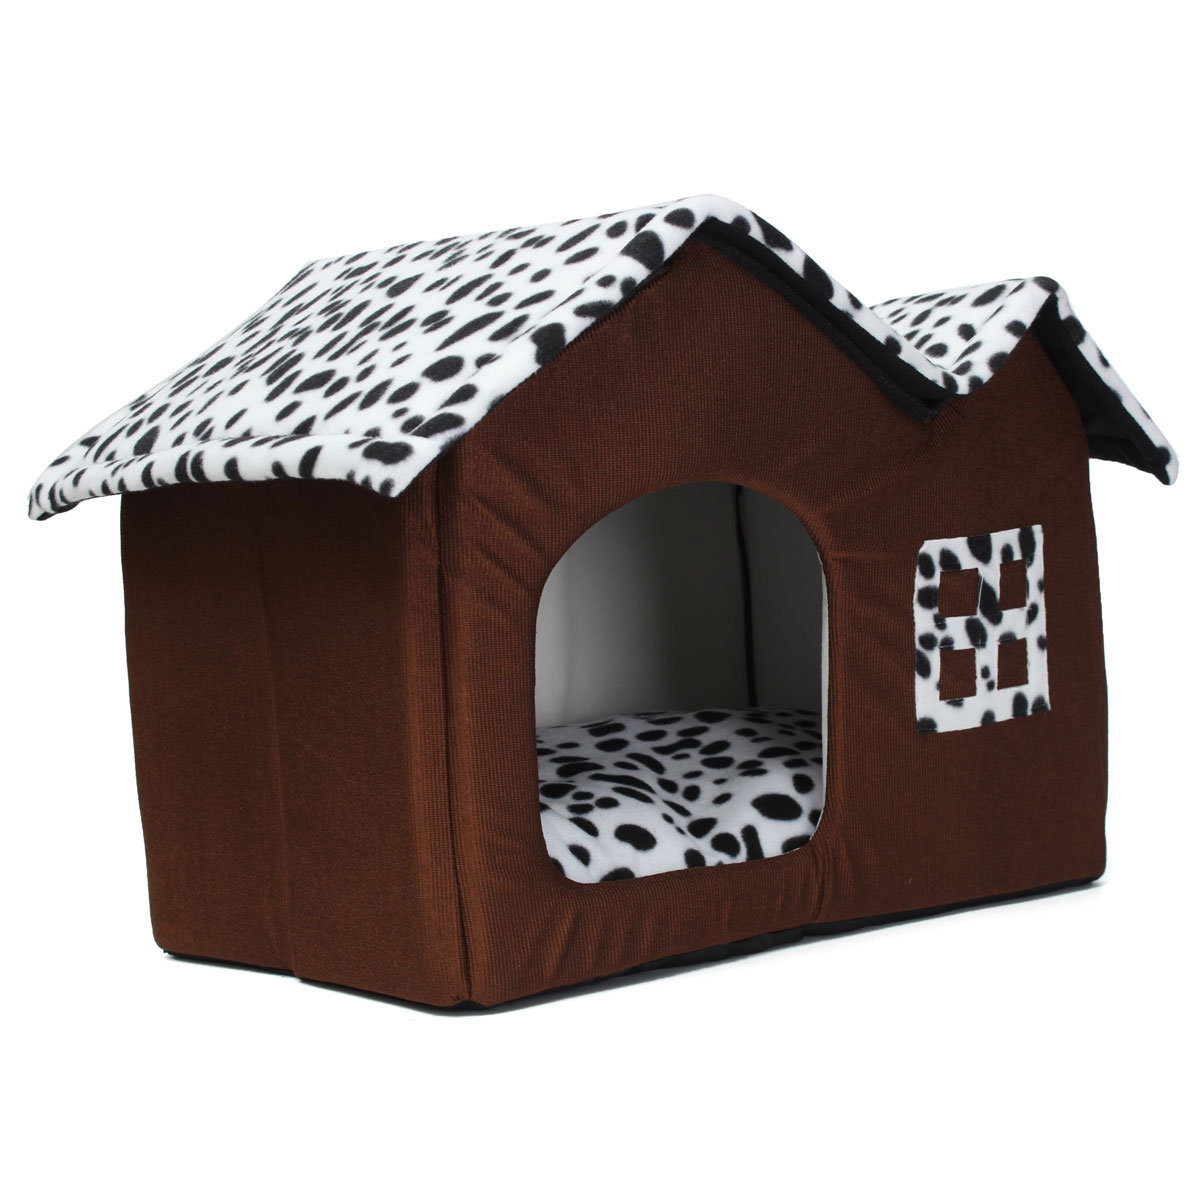 Portable Luxury Pet Dog Cat Bed House Warm Mat Snug Puppy Bedding Home Gift